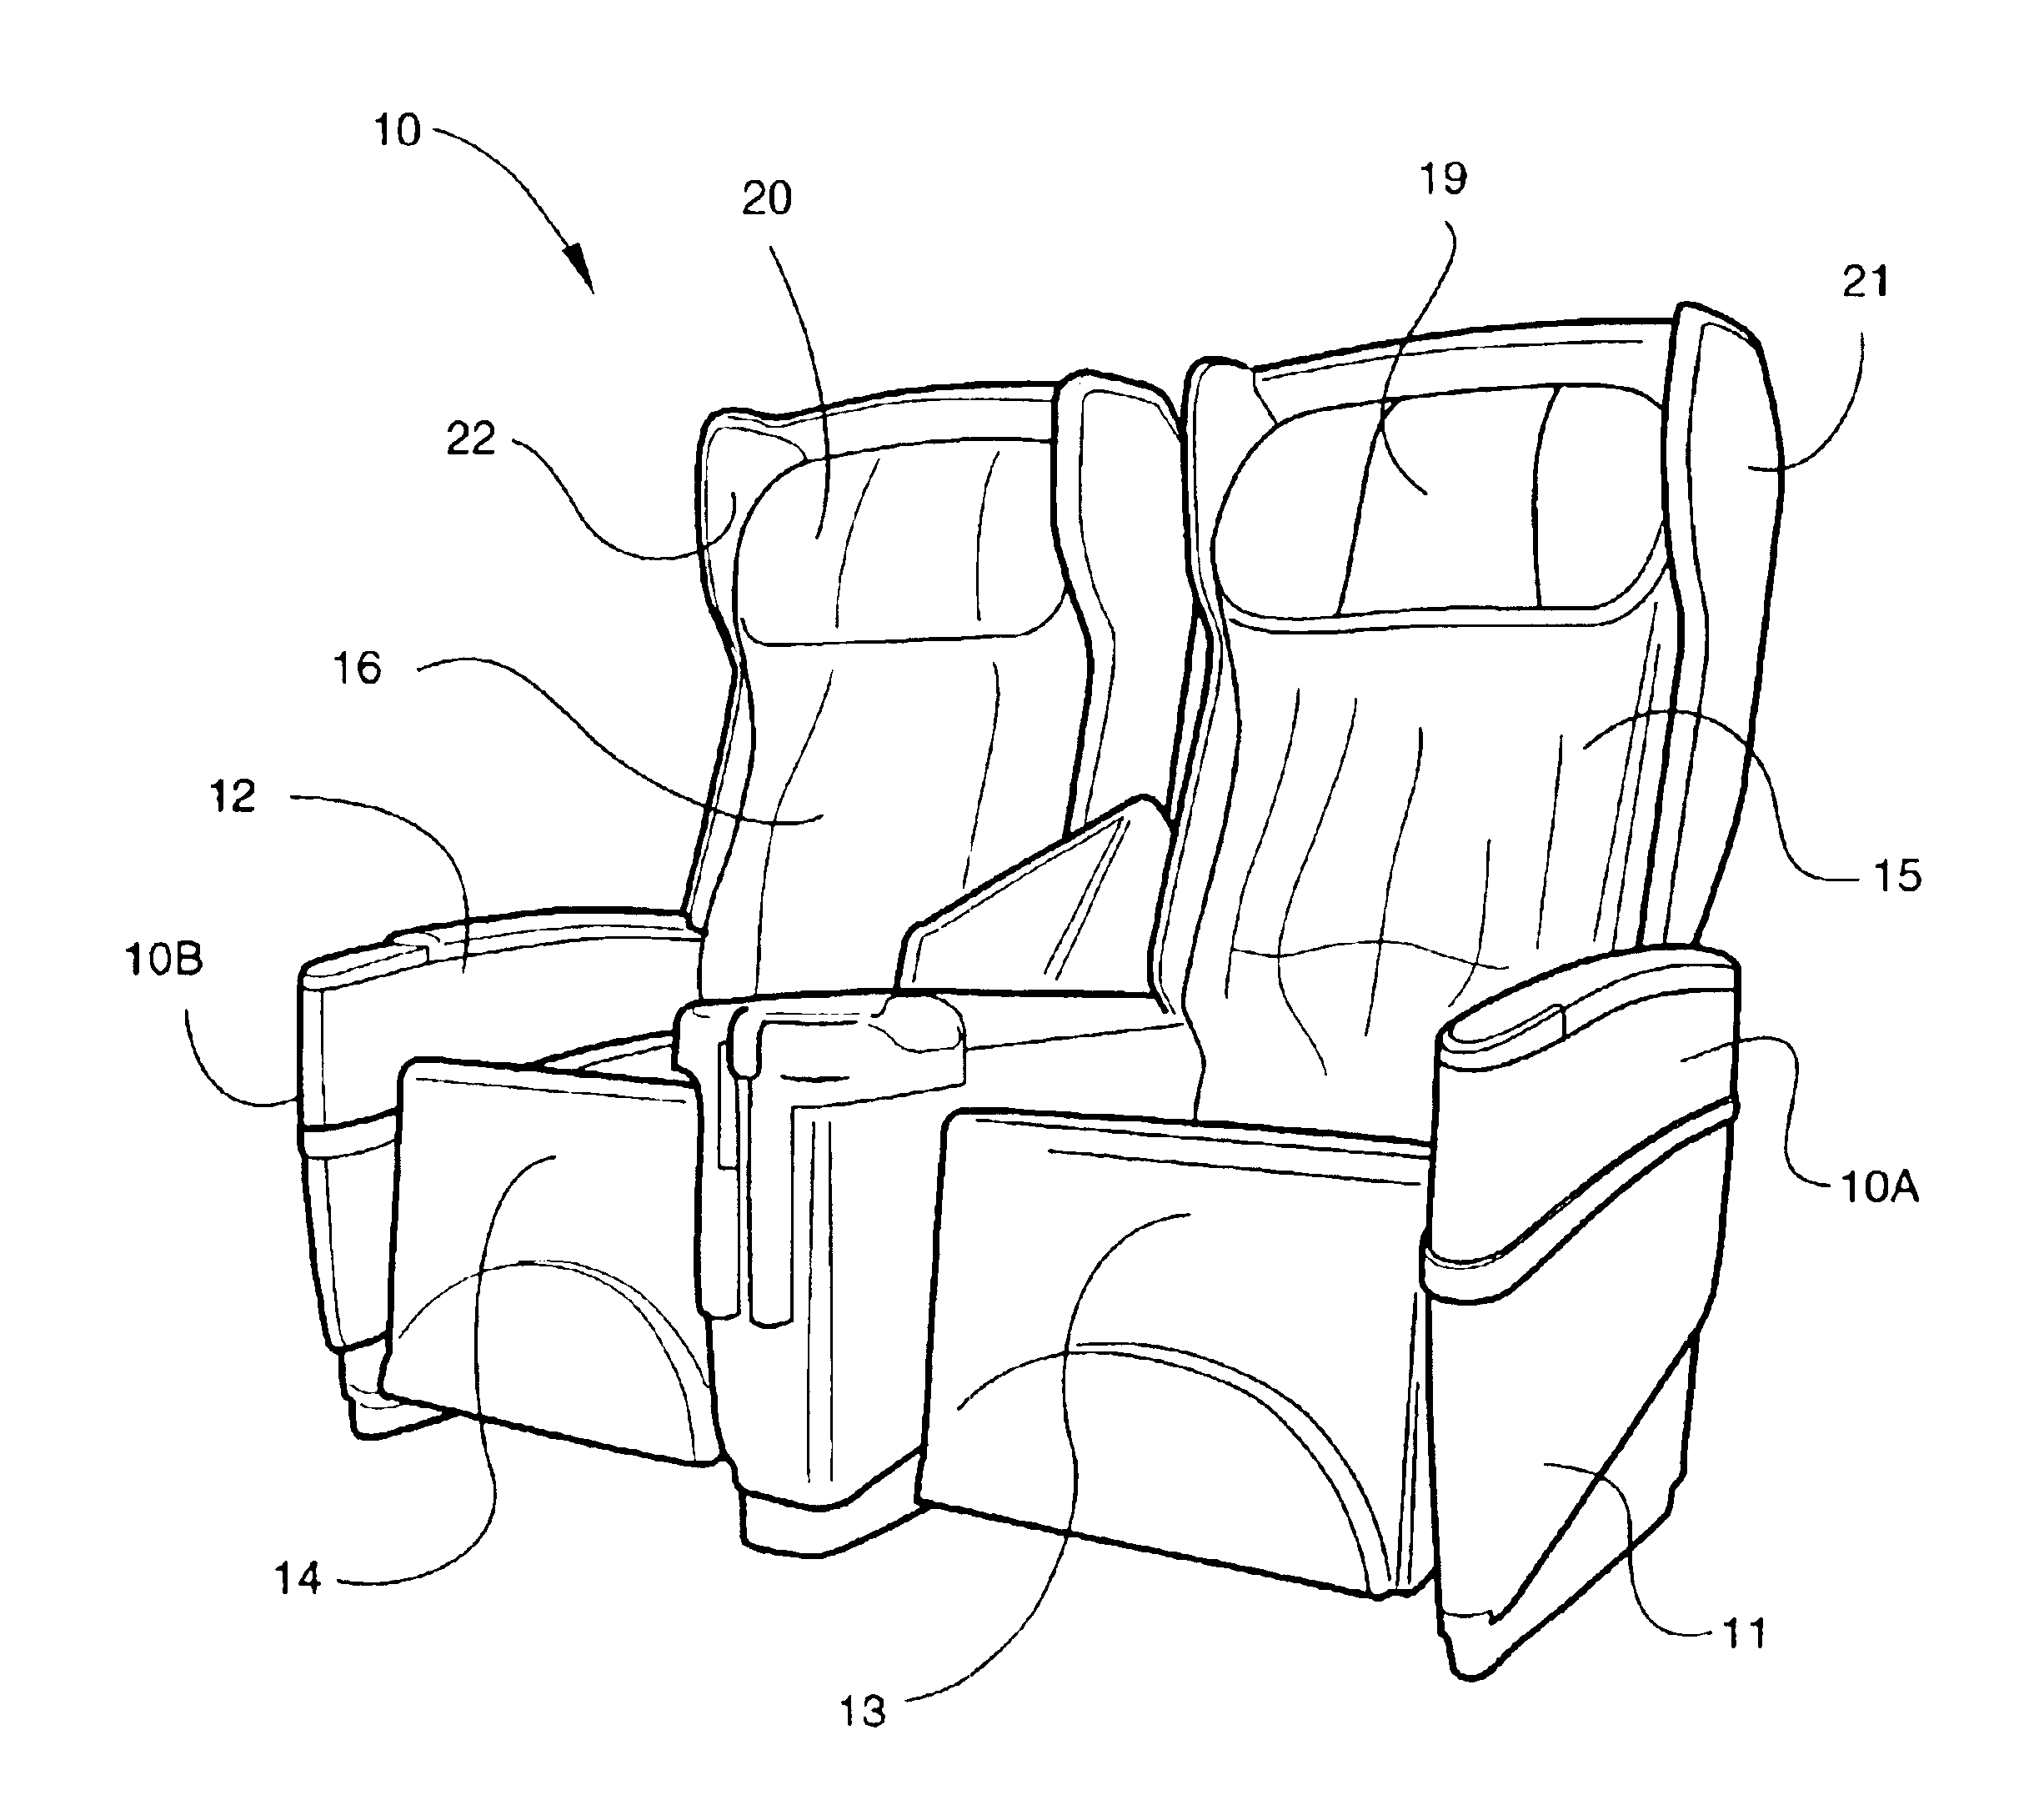 Passenger seat with privacy shell